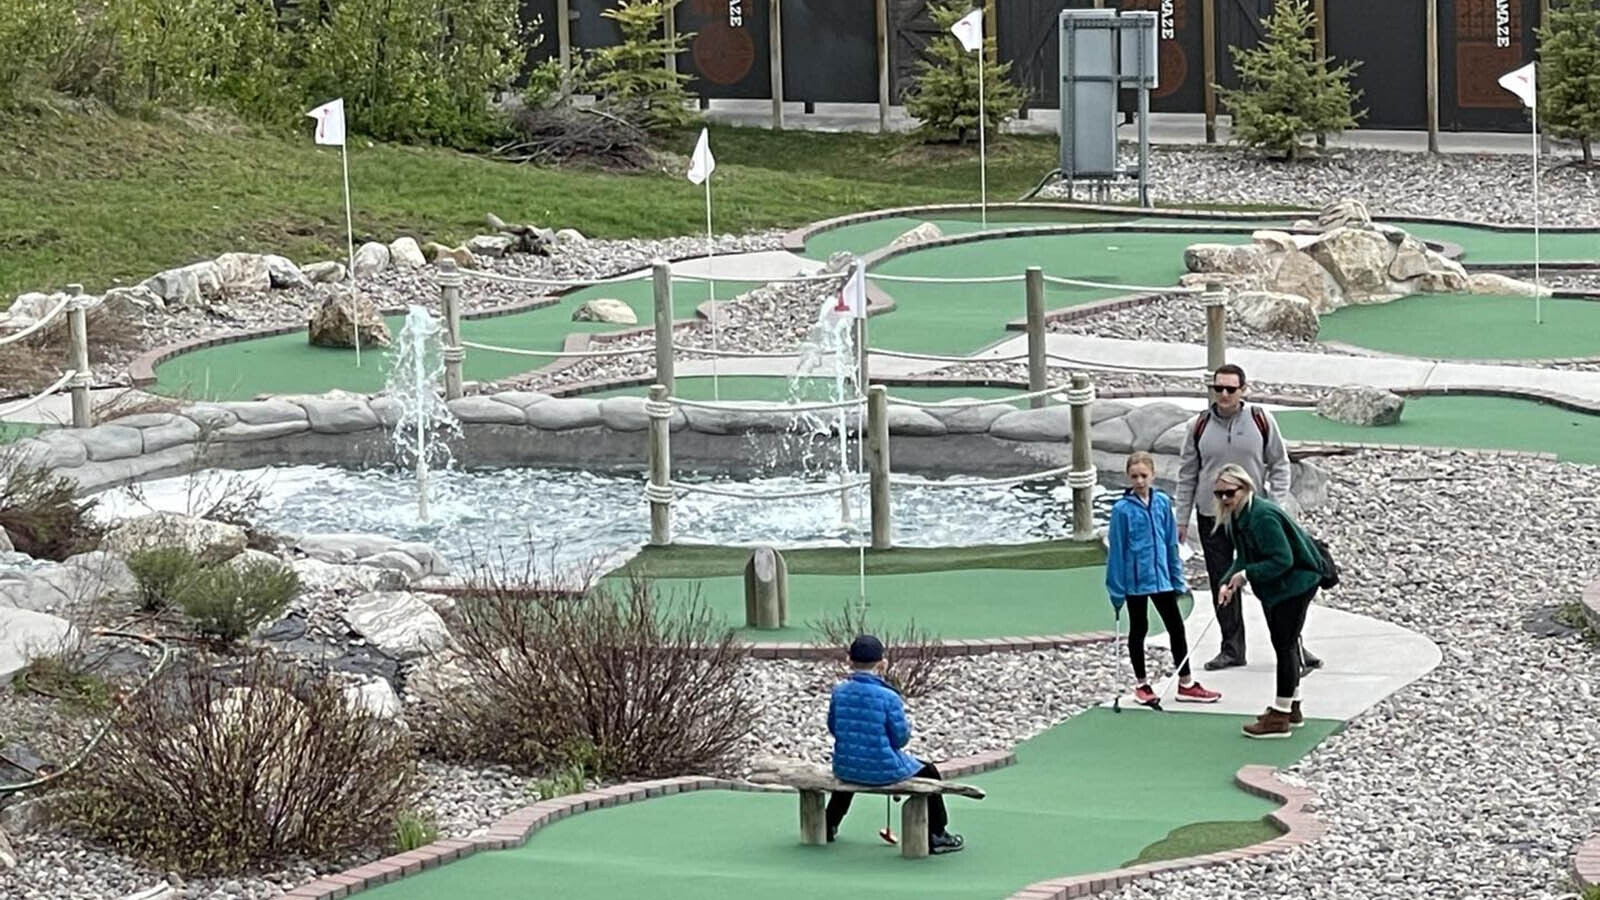 An 18-hole miniature golf course is a popular seasonal attract at Snow King.